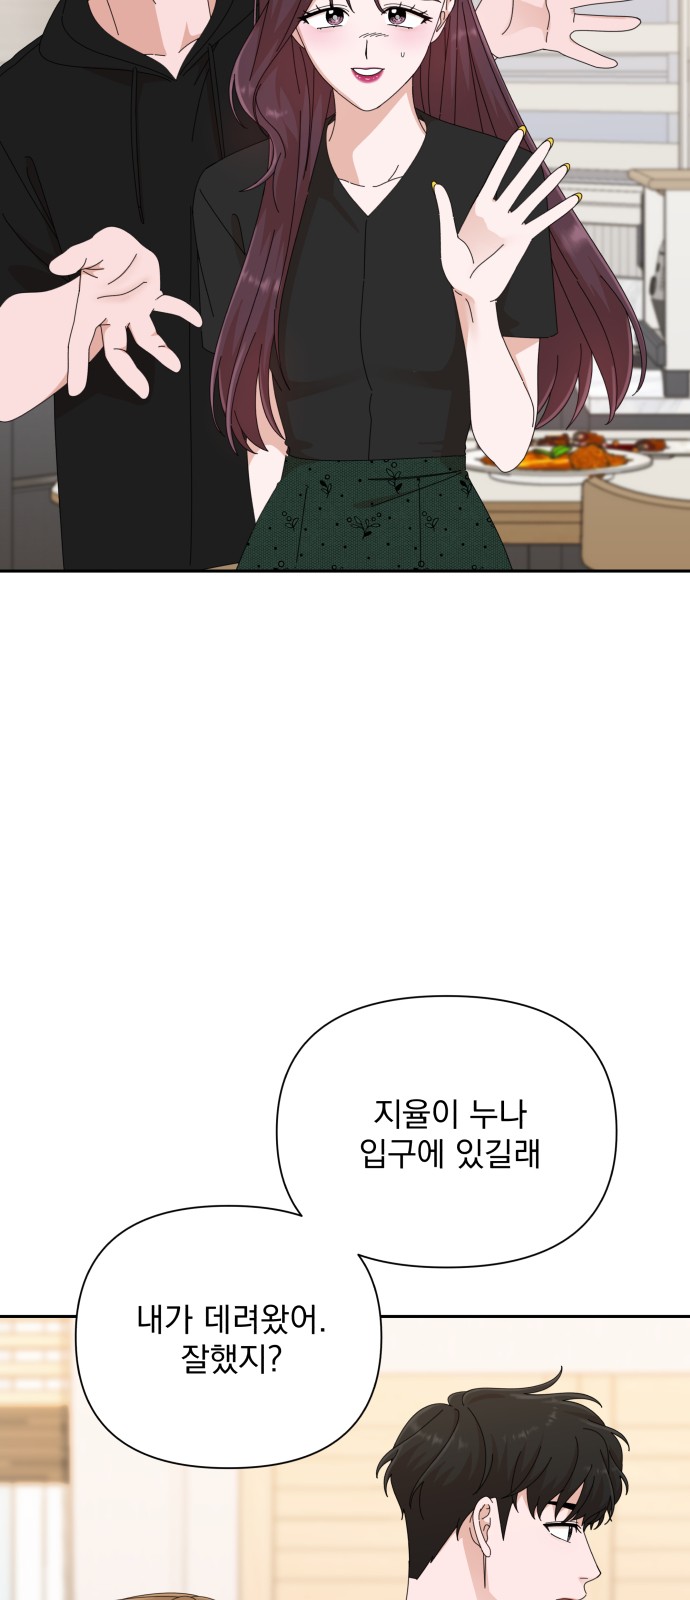 The Man With Pretty Lips - Chapter 32 - Page 2